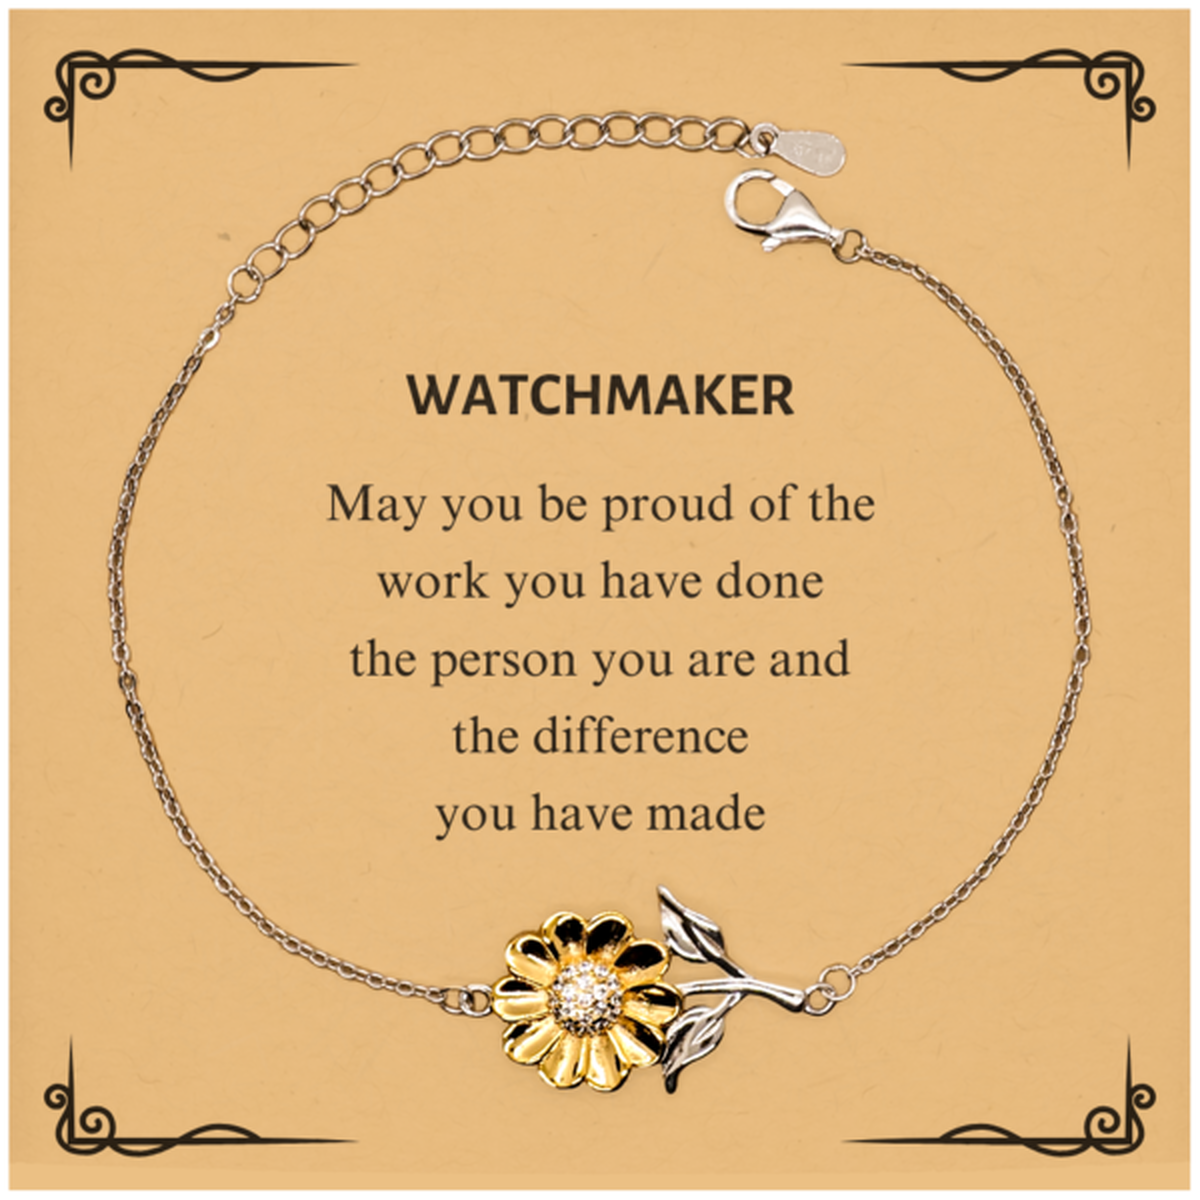 Watchmaker May you be proud of the work you have done, Retirement Watchmaker Sunflower Bracelet for Colleague Appreciation Gifts Amazing for Watchmaker